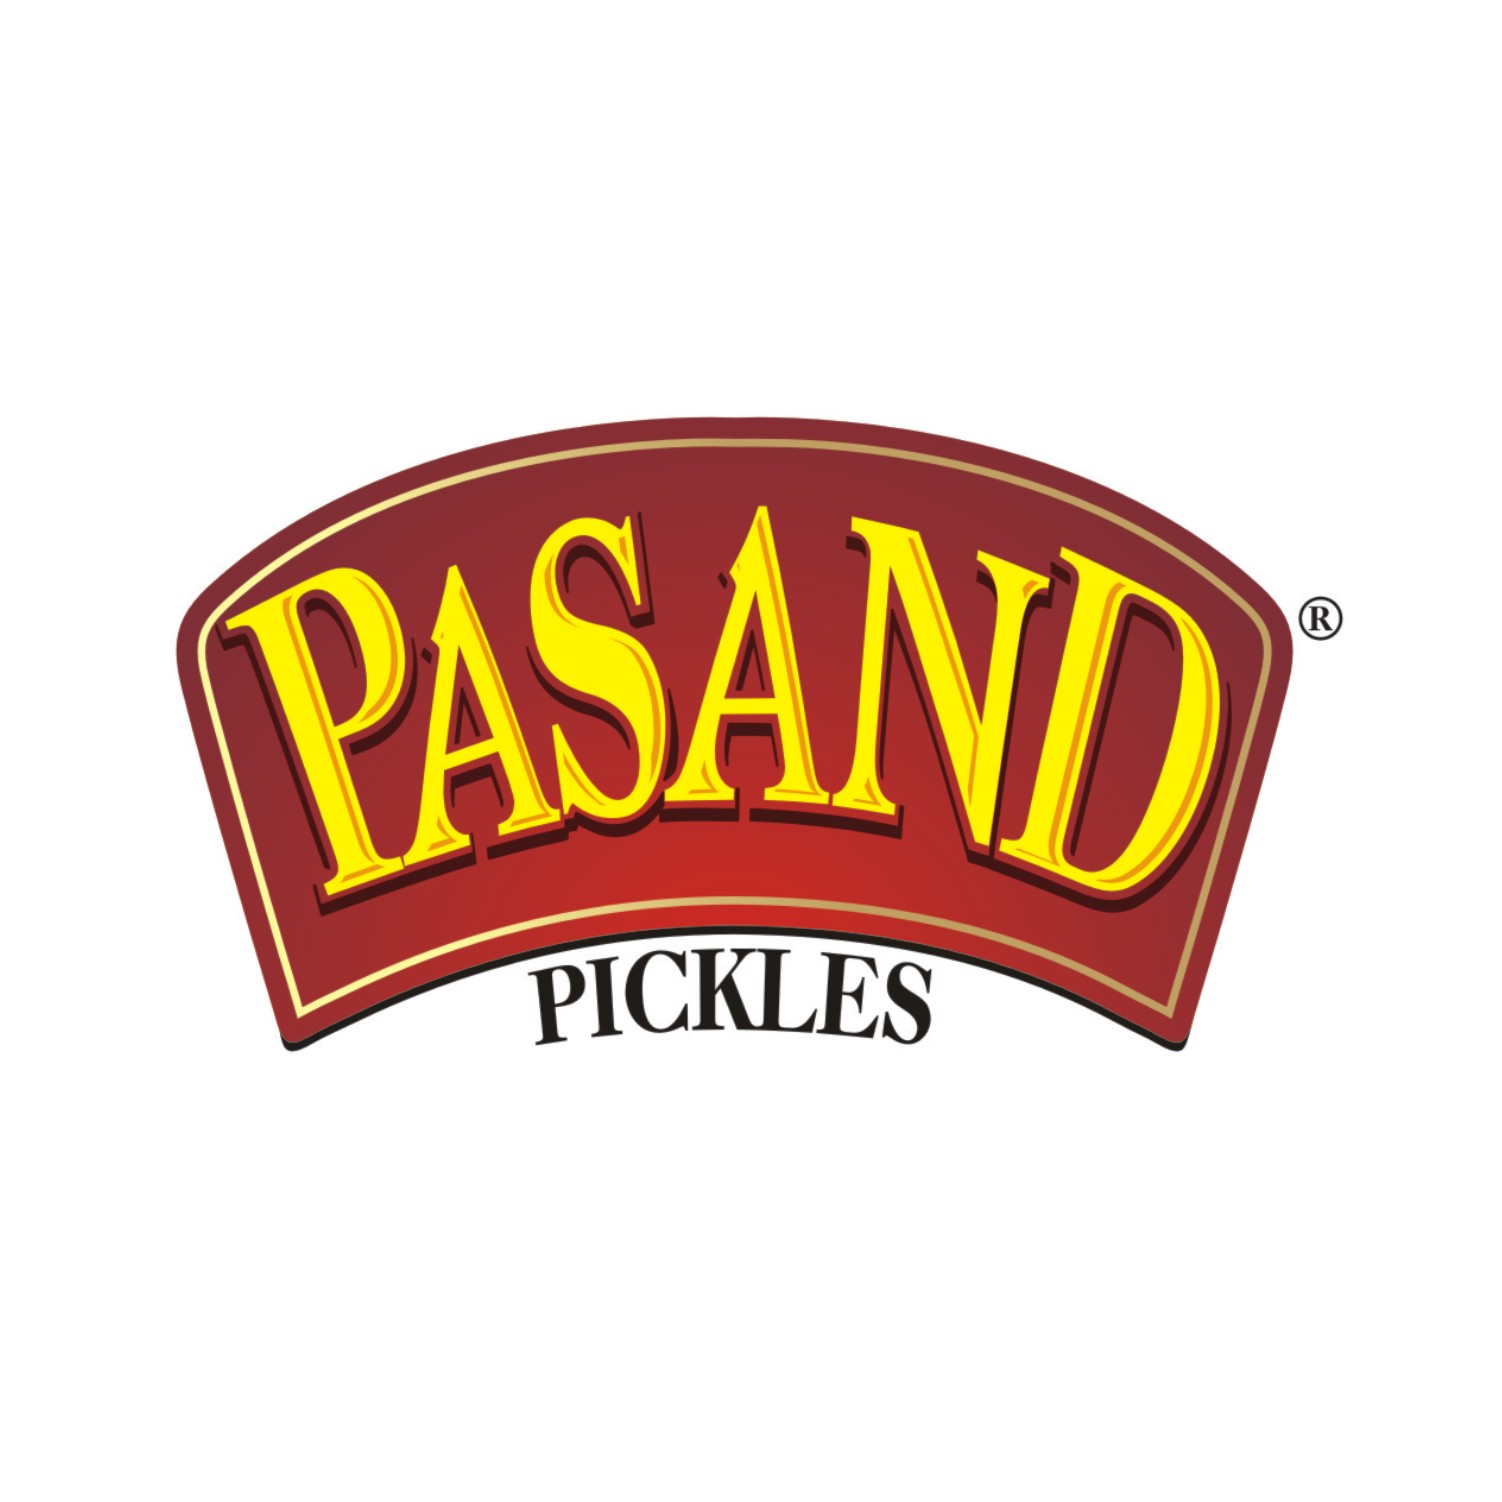 Pasand Pickles